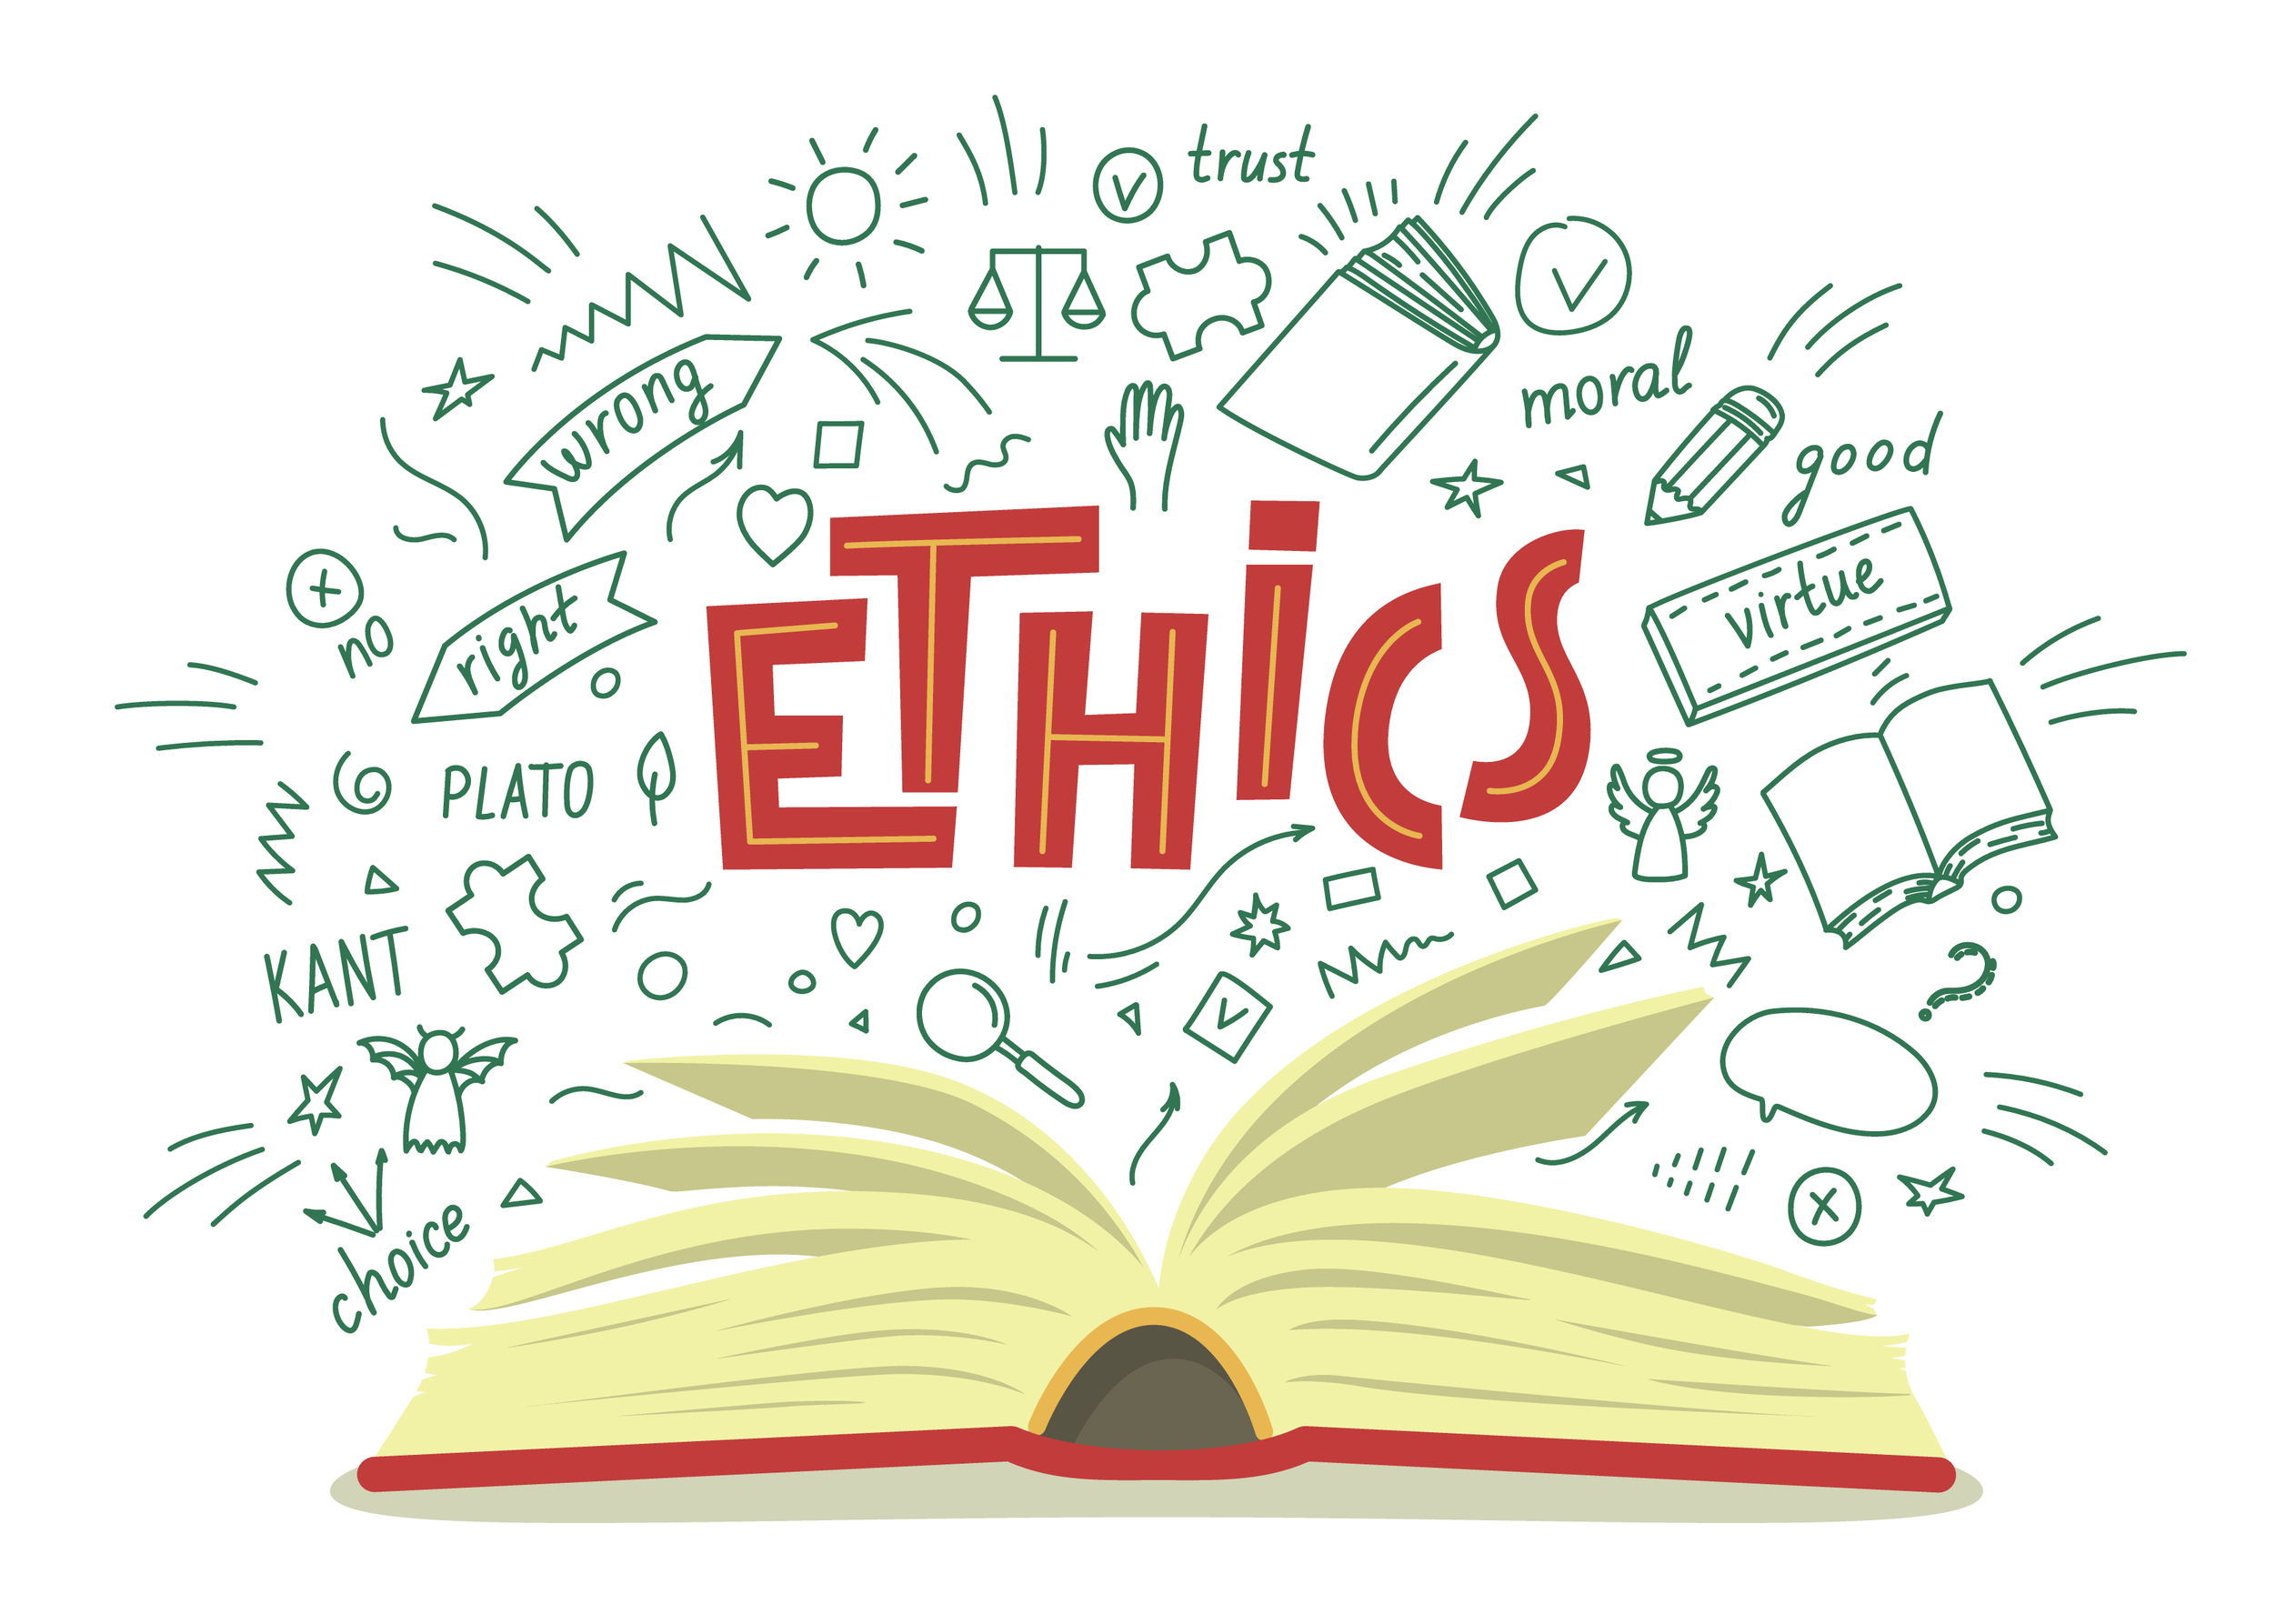 Addressing Ethical Issues in Clinical Practice